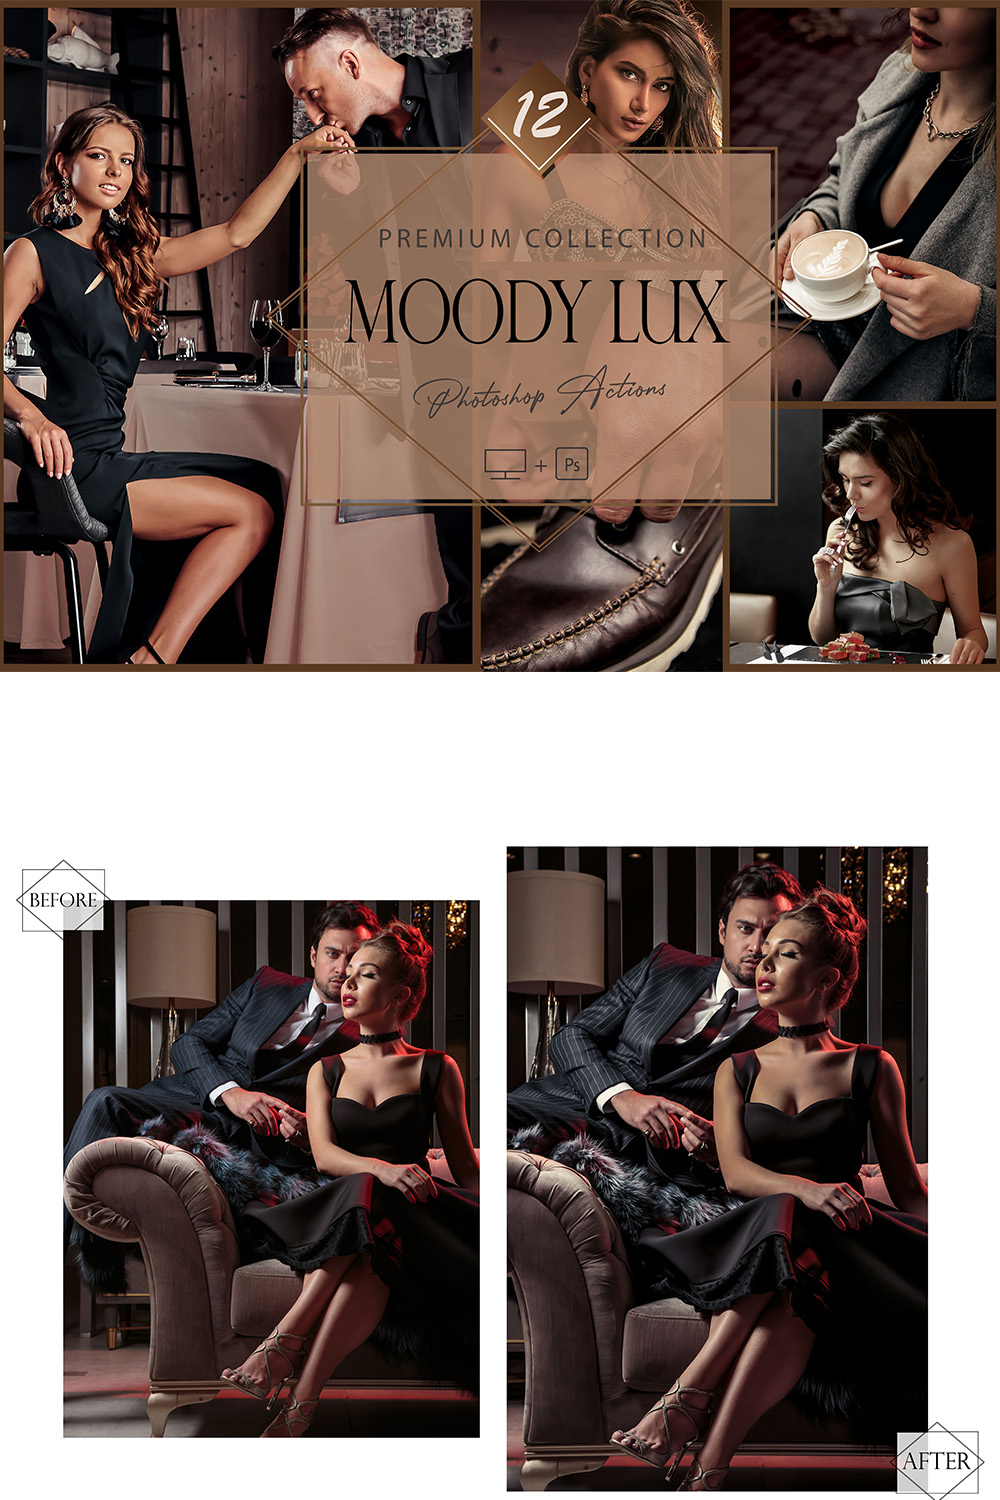 12 Photoshop Actions, Moody Lux Ps Action, Luxuries ACR Preset, Black Filter, Lifestyle Theme For Instagram, luxuriousness, Bronze Portrait pinterest preview image.